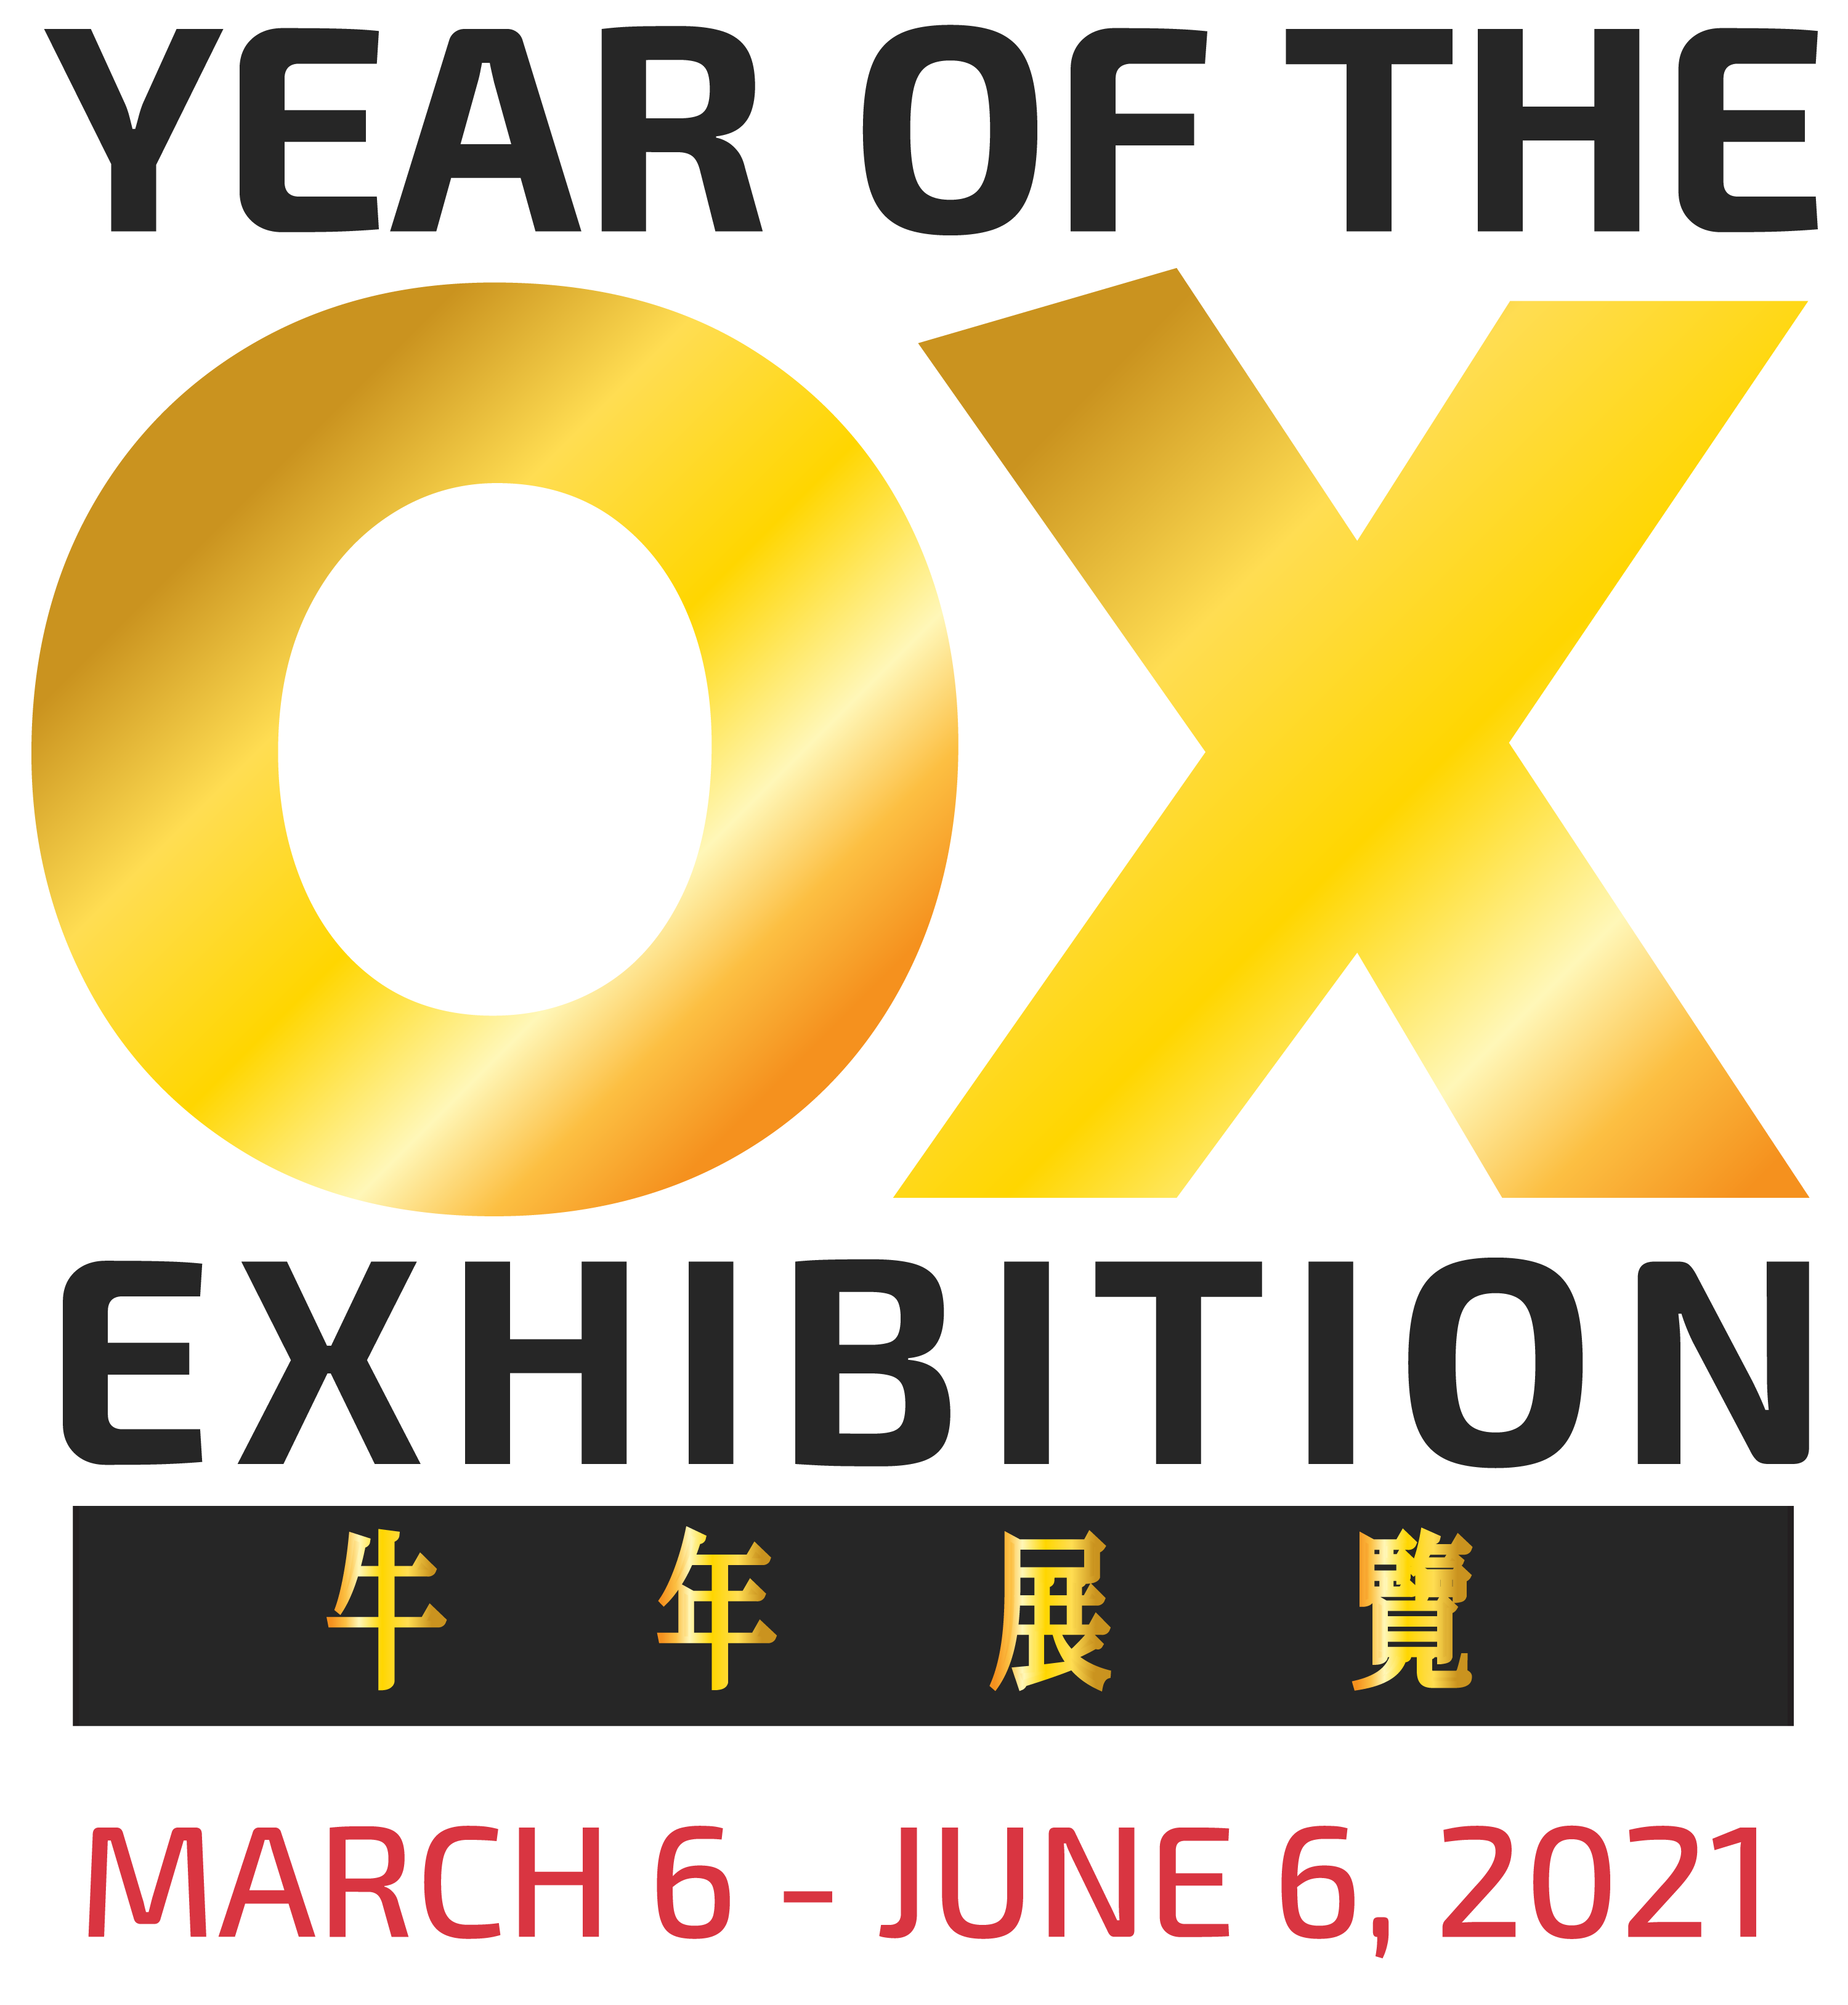 Year of the Ox Exhibition